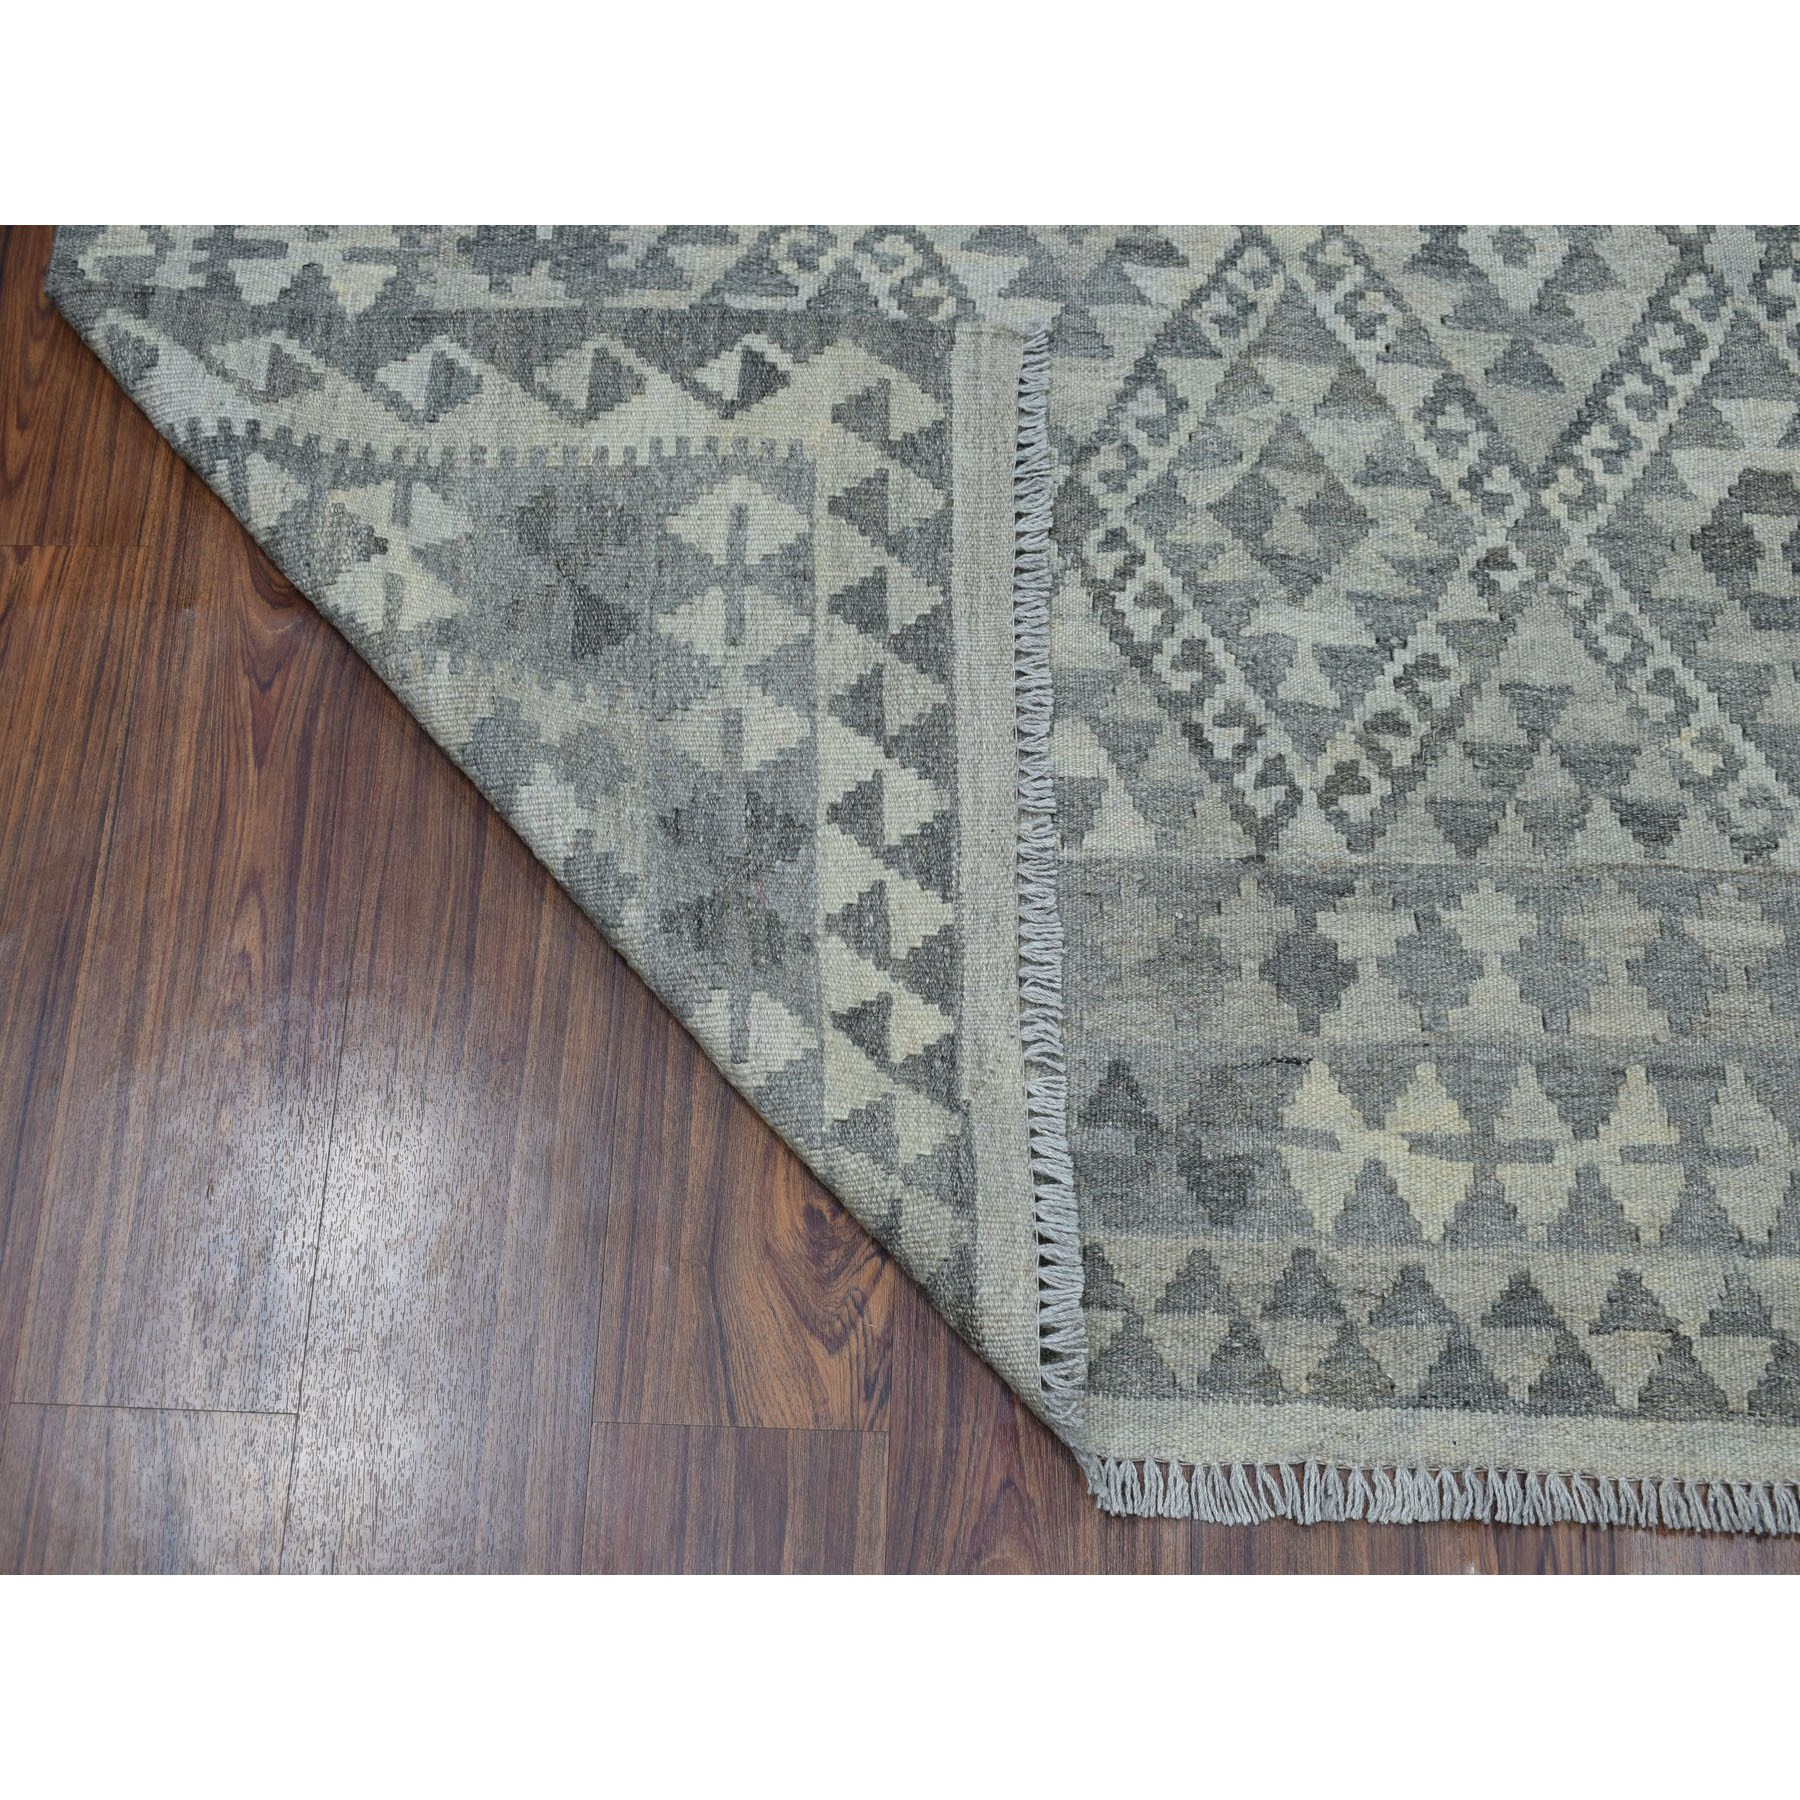 5-x6-7  Undyed Reversible Natural Wool Afghan Kilim Hand Woven Oriental Rug 